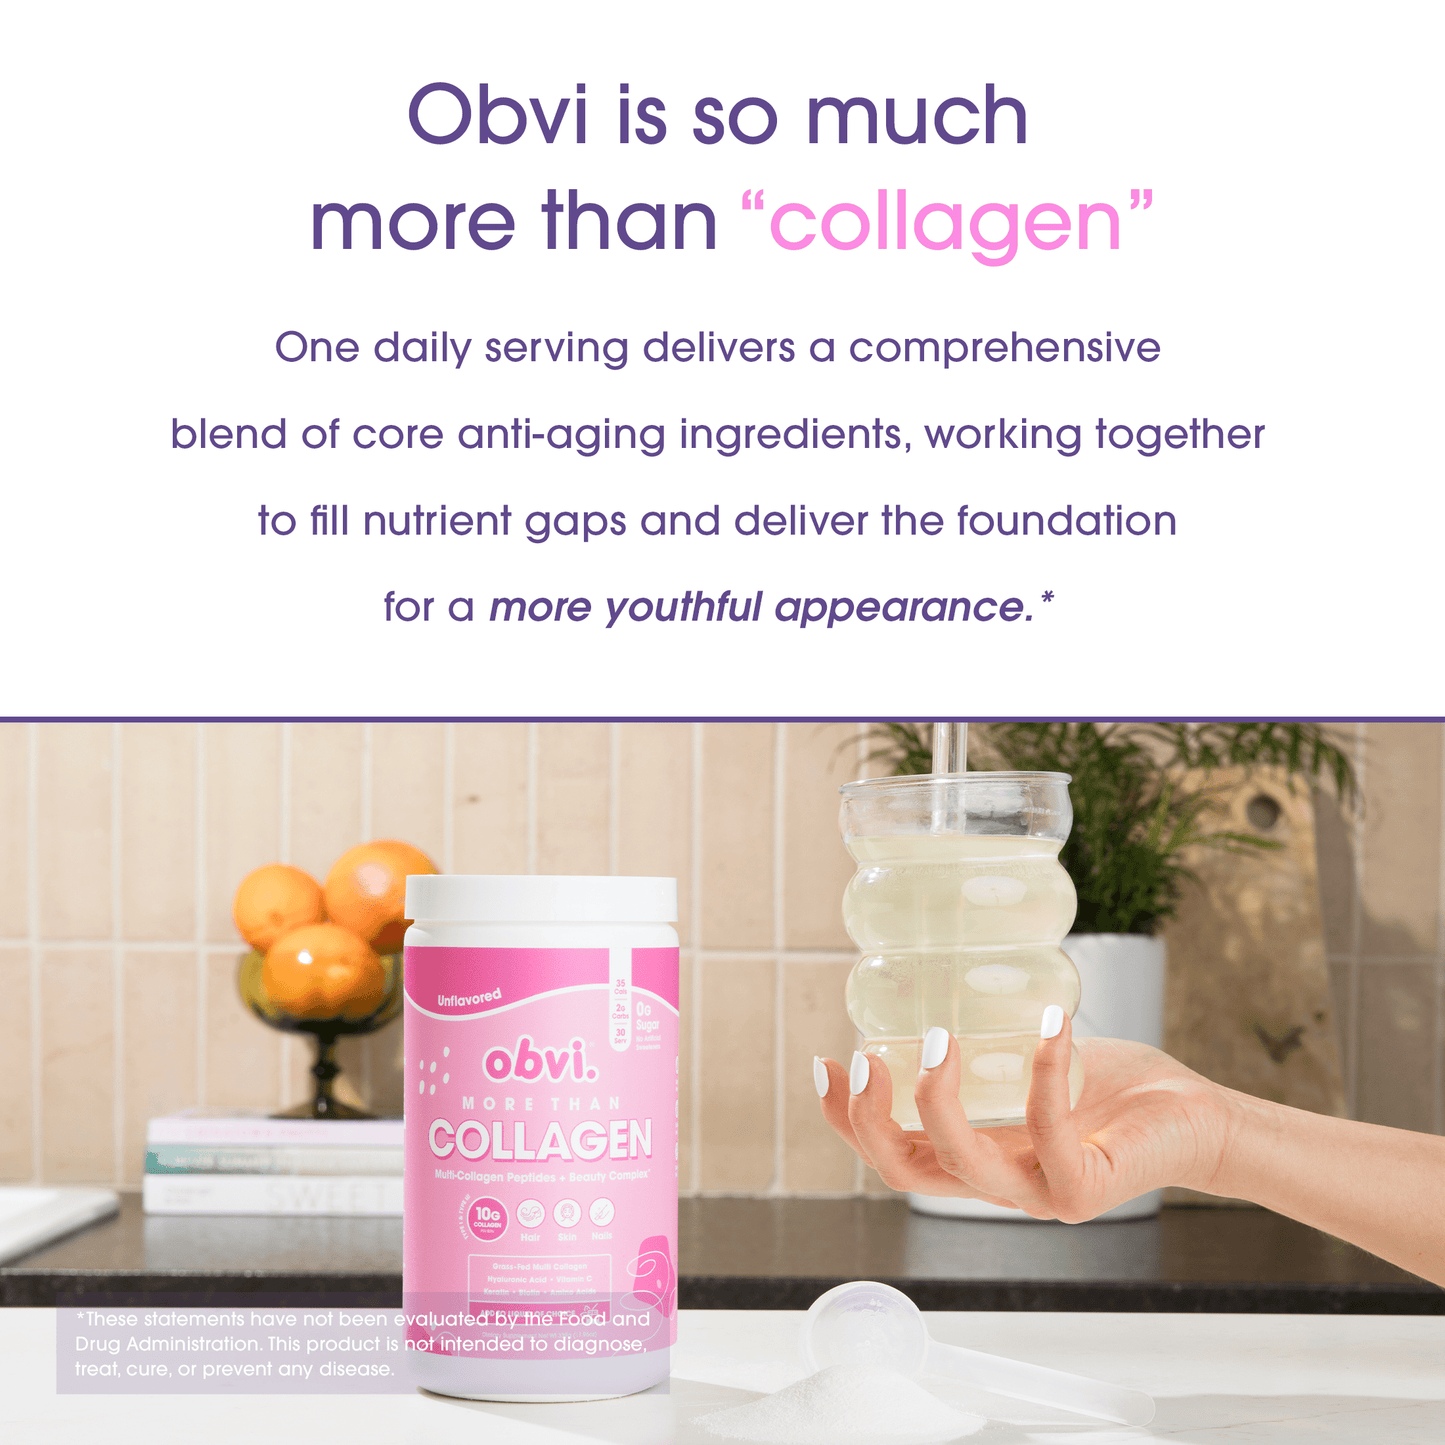 More Than Collagen | Unflavored